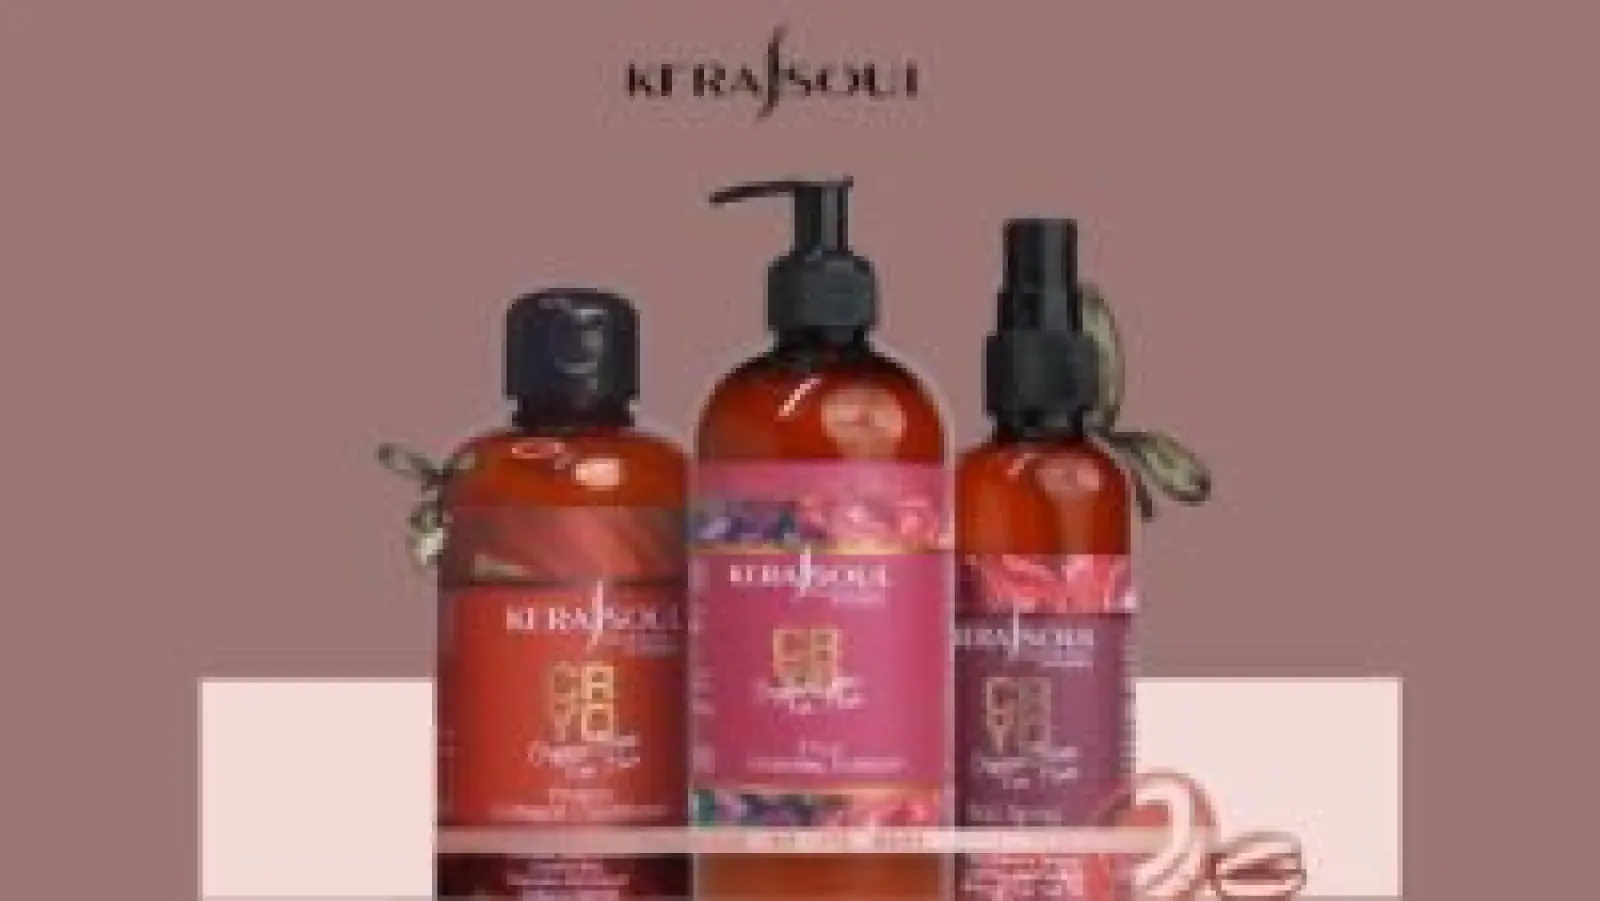 KeraSoul Revolutionizes Hair Care with 100 Percent Natural Cryo Detox and Collagen-Protein Treatments